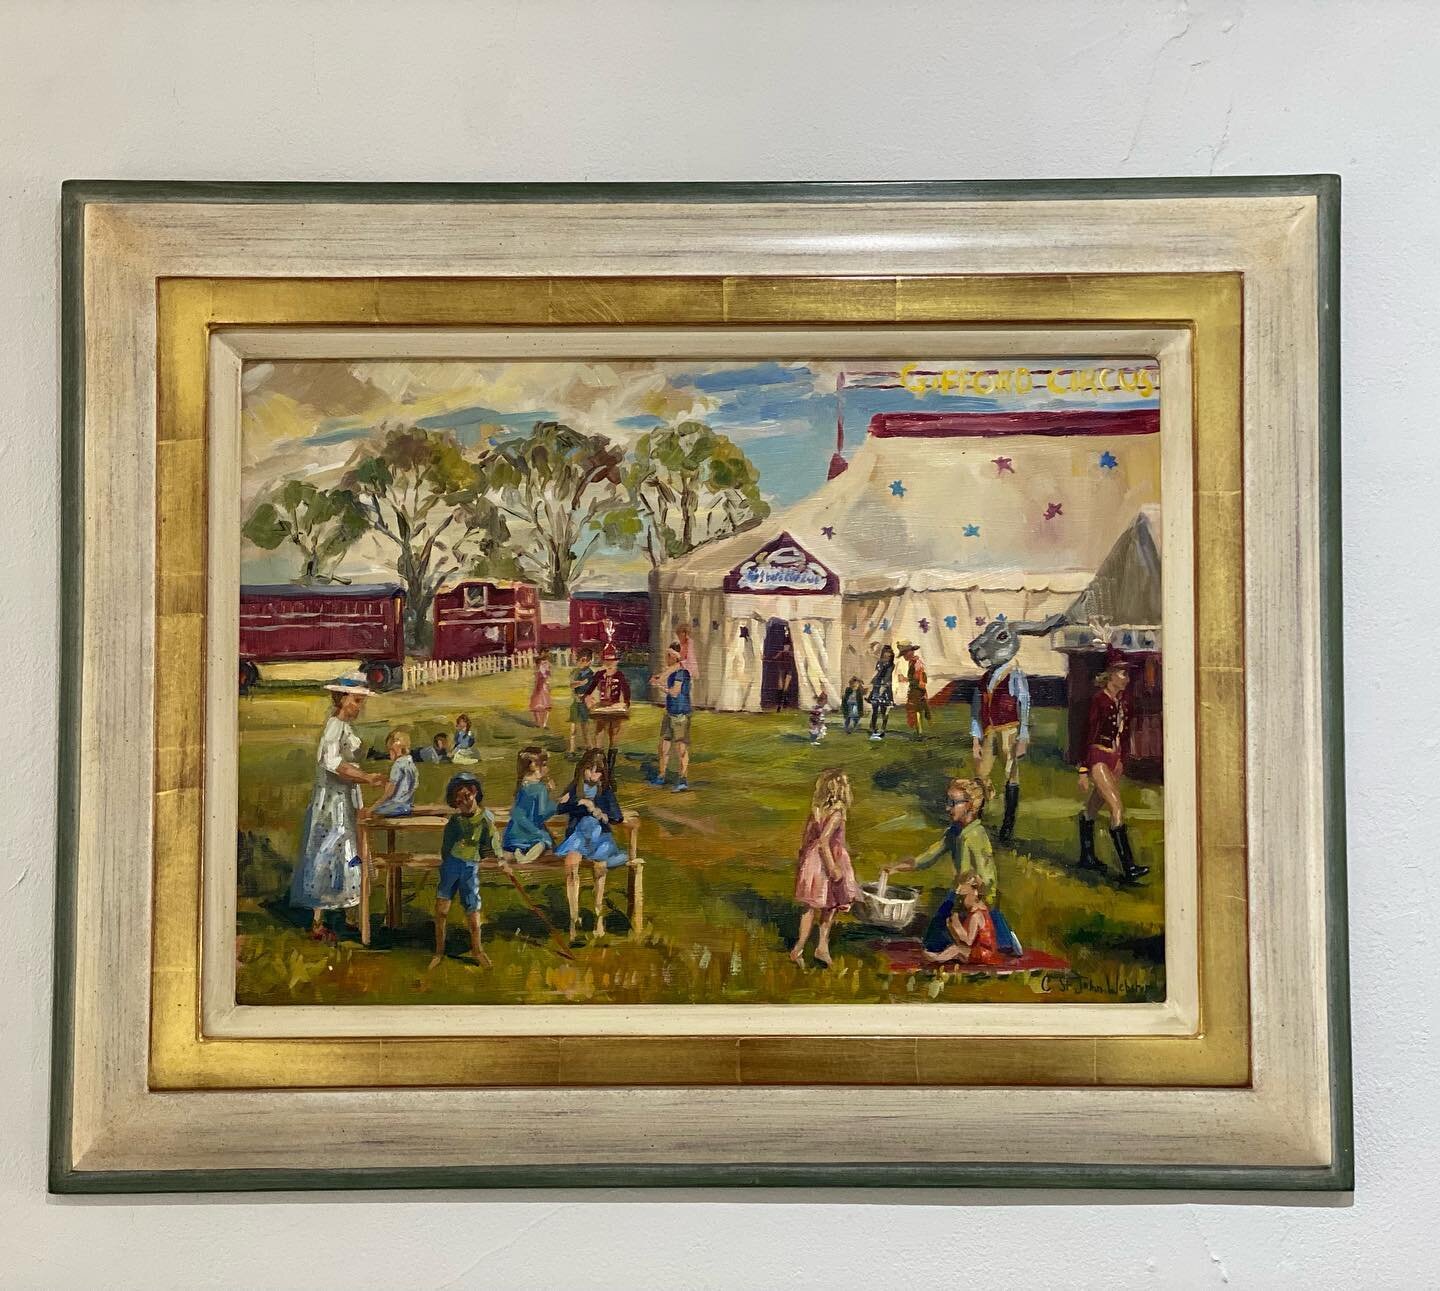 &lsquo;Circus Picnic&rsquo; - the wild and wonderful scenes outside and inside the Giffords circus.  Very excited to show this painting along with other Giffords Circus paintings - which will be in my solo show at the Osborne Studio Gallery which ope